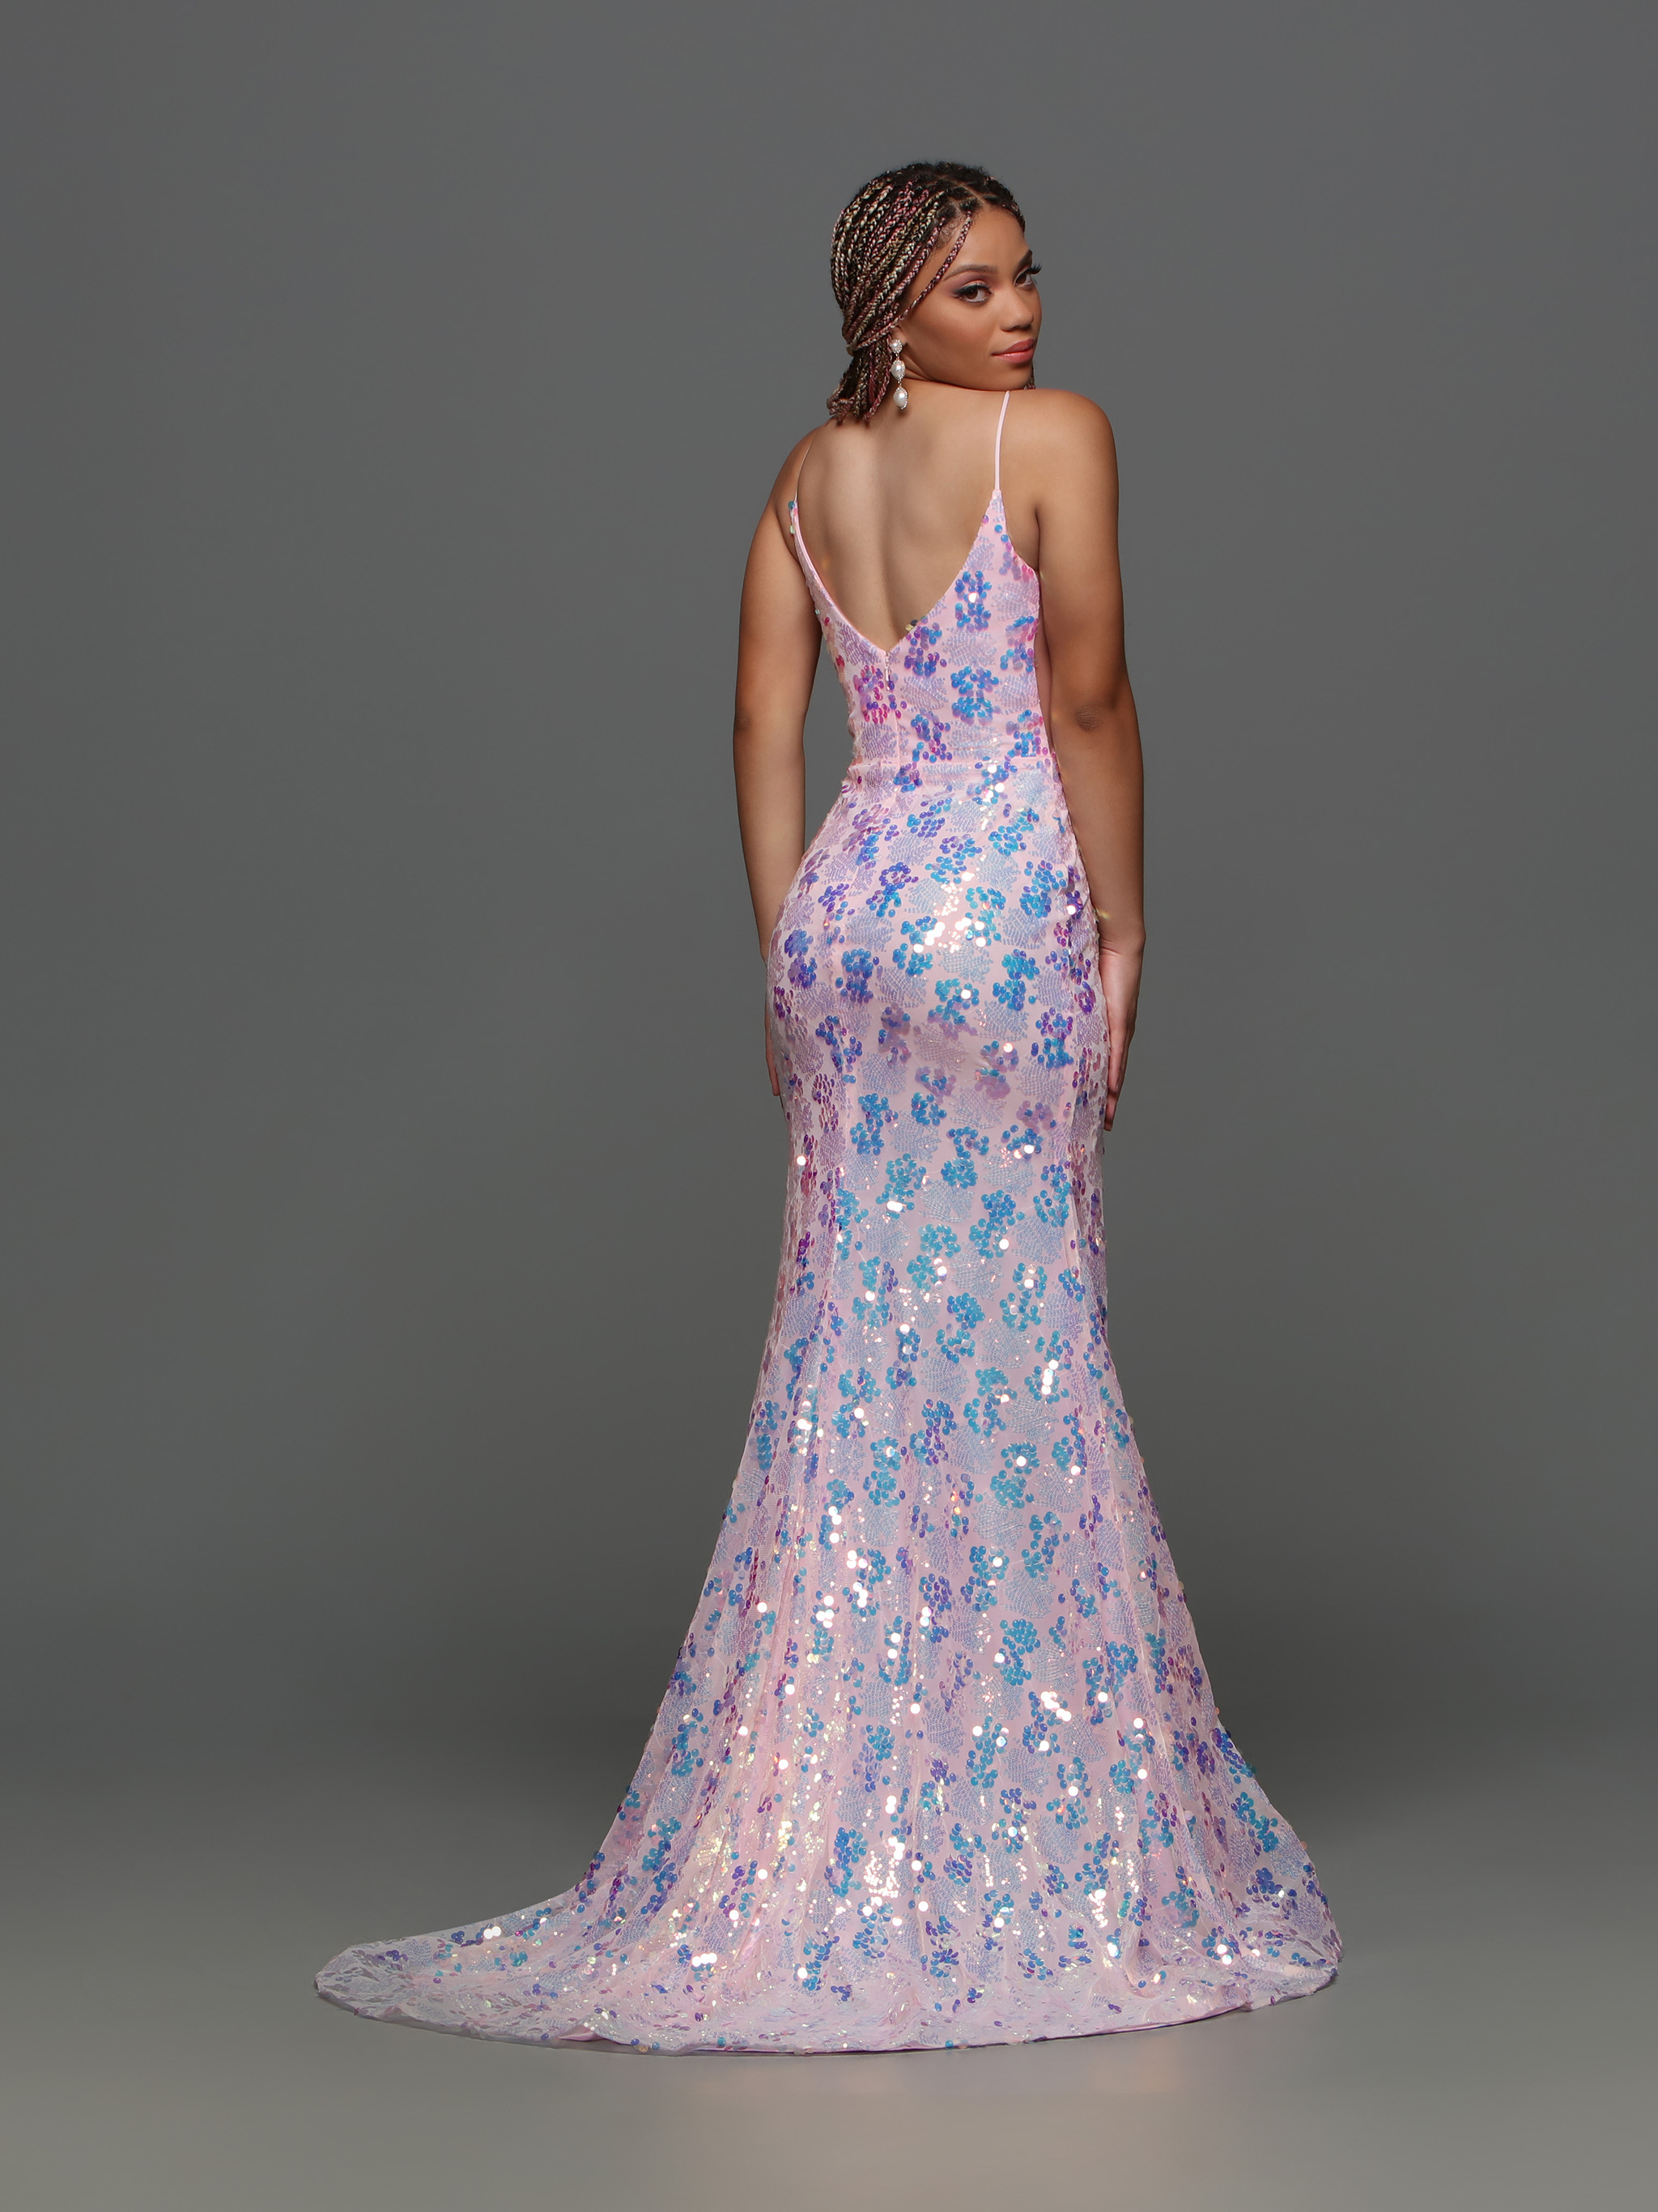 Image showing back view of style #72320